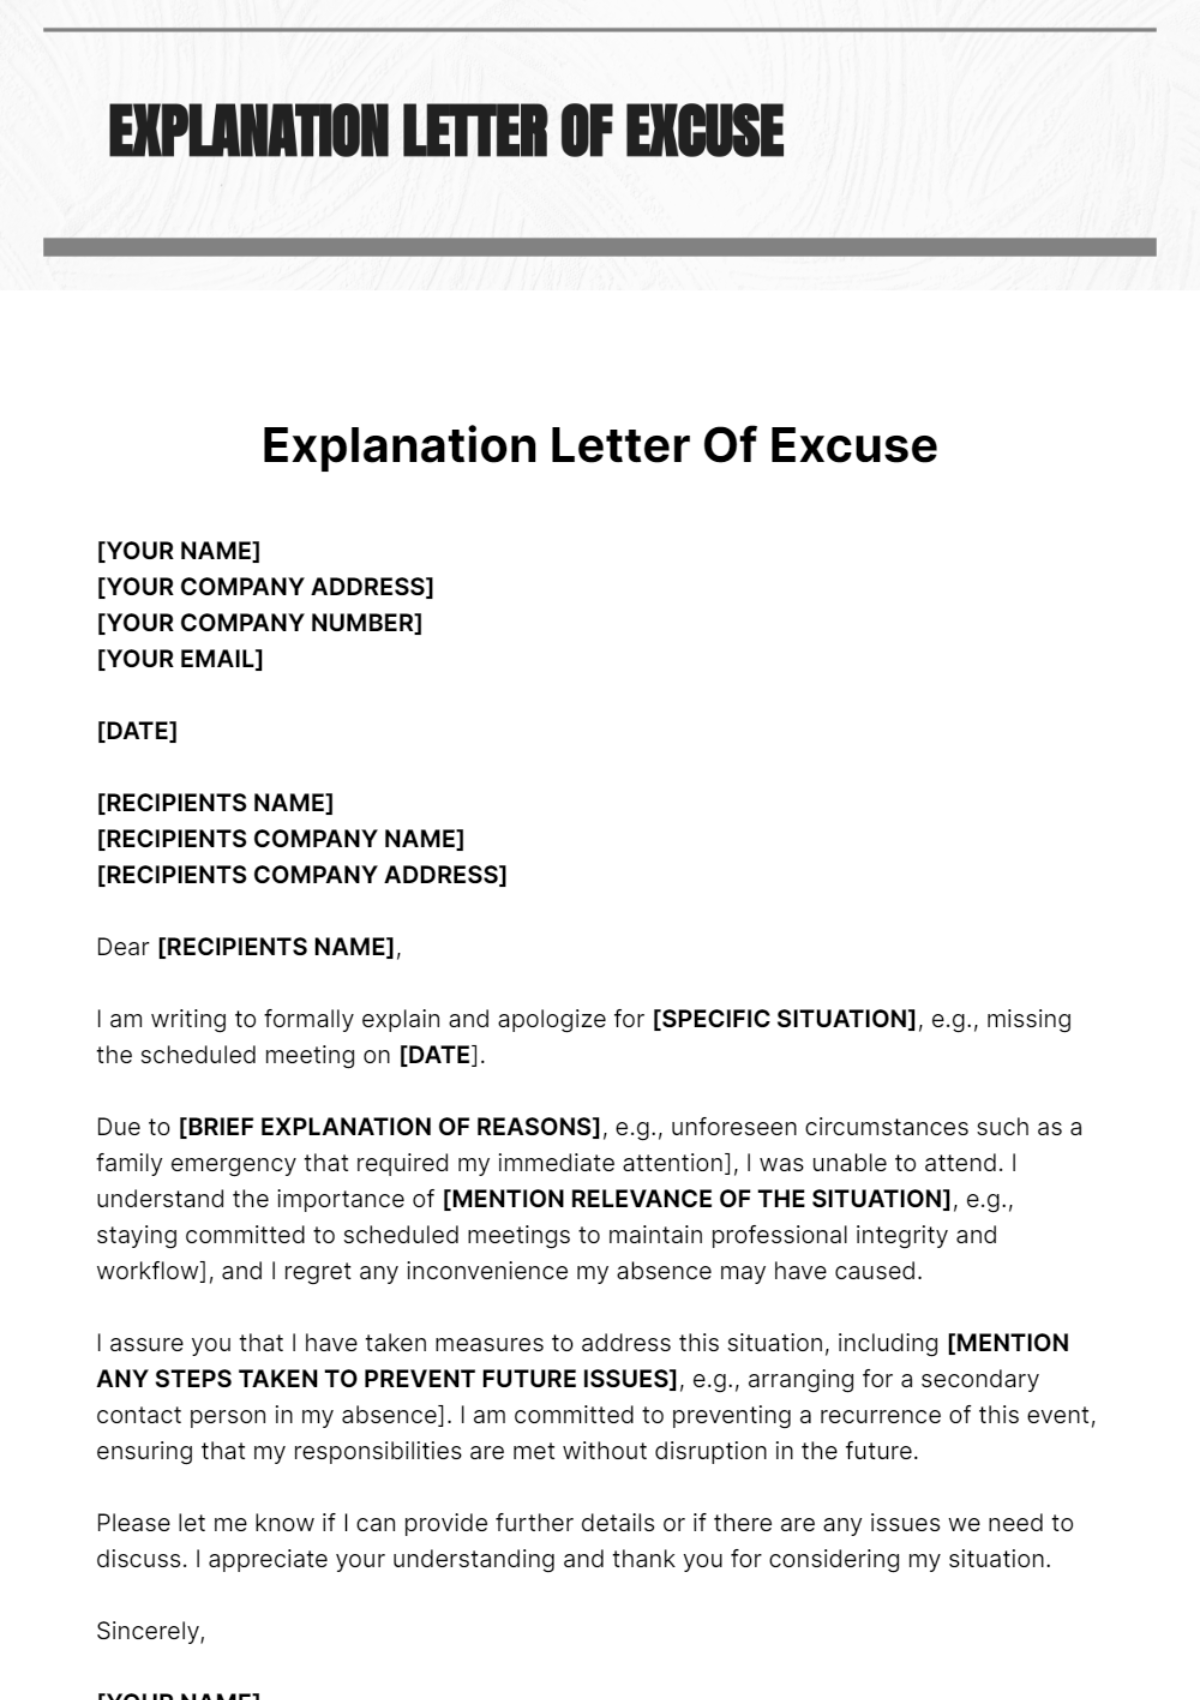 Explanation Letter Of Excuse Template